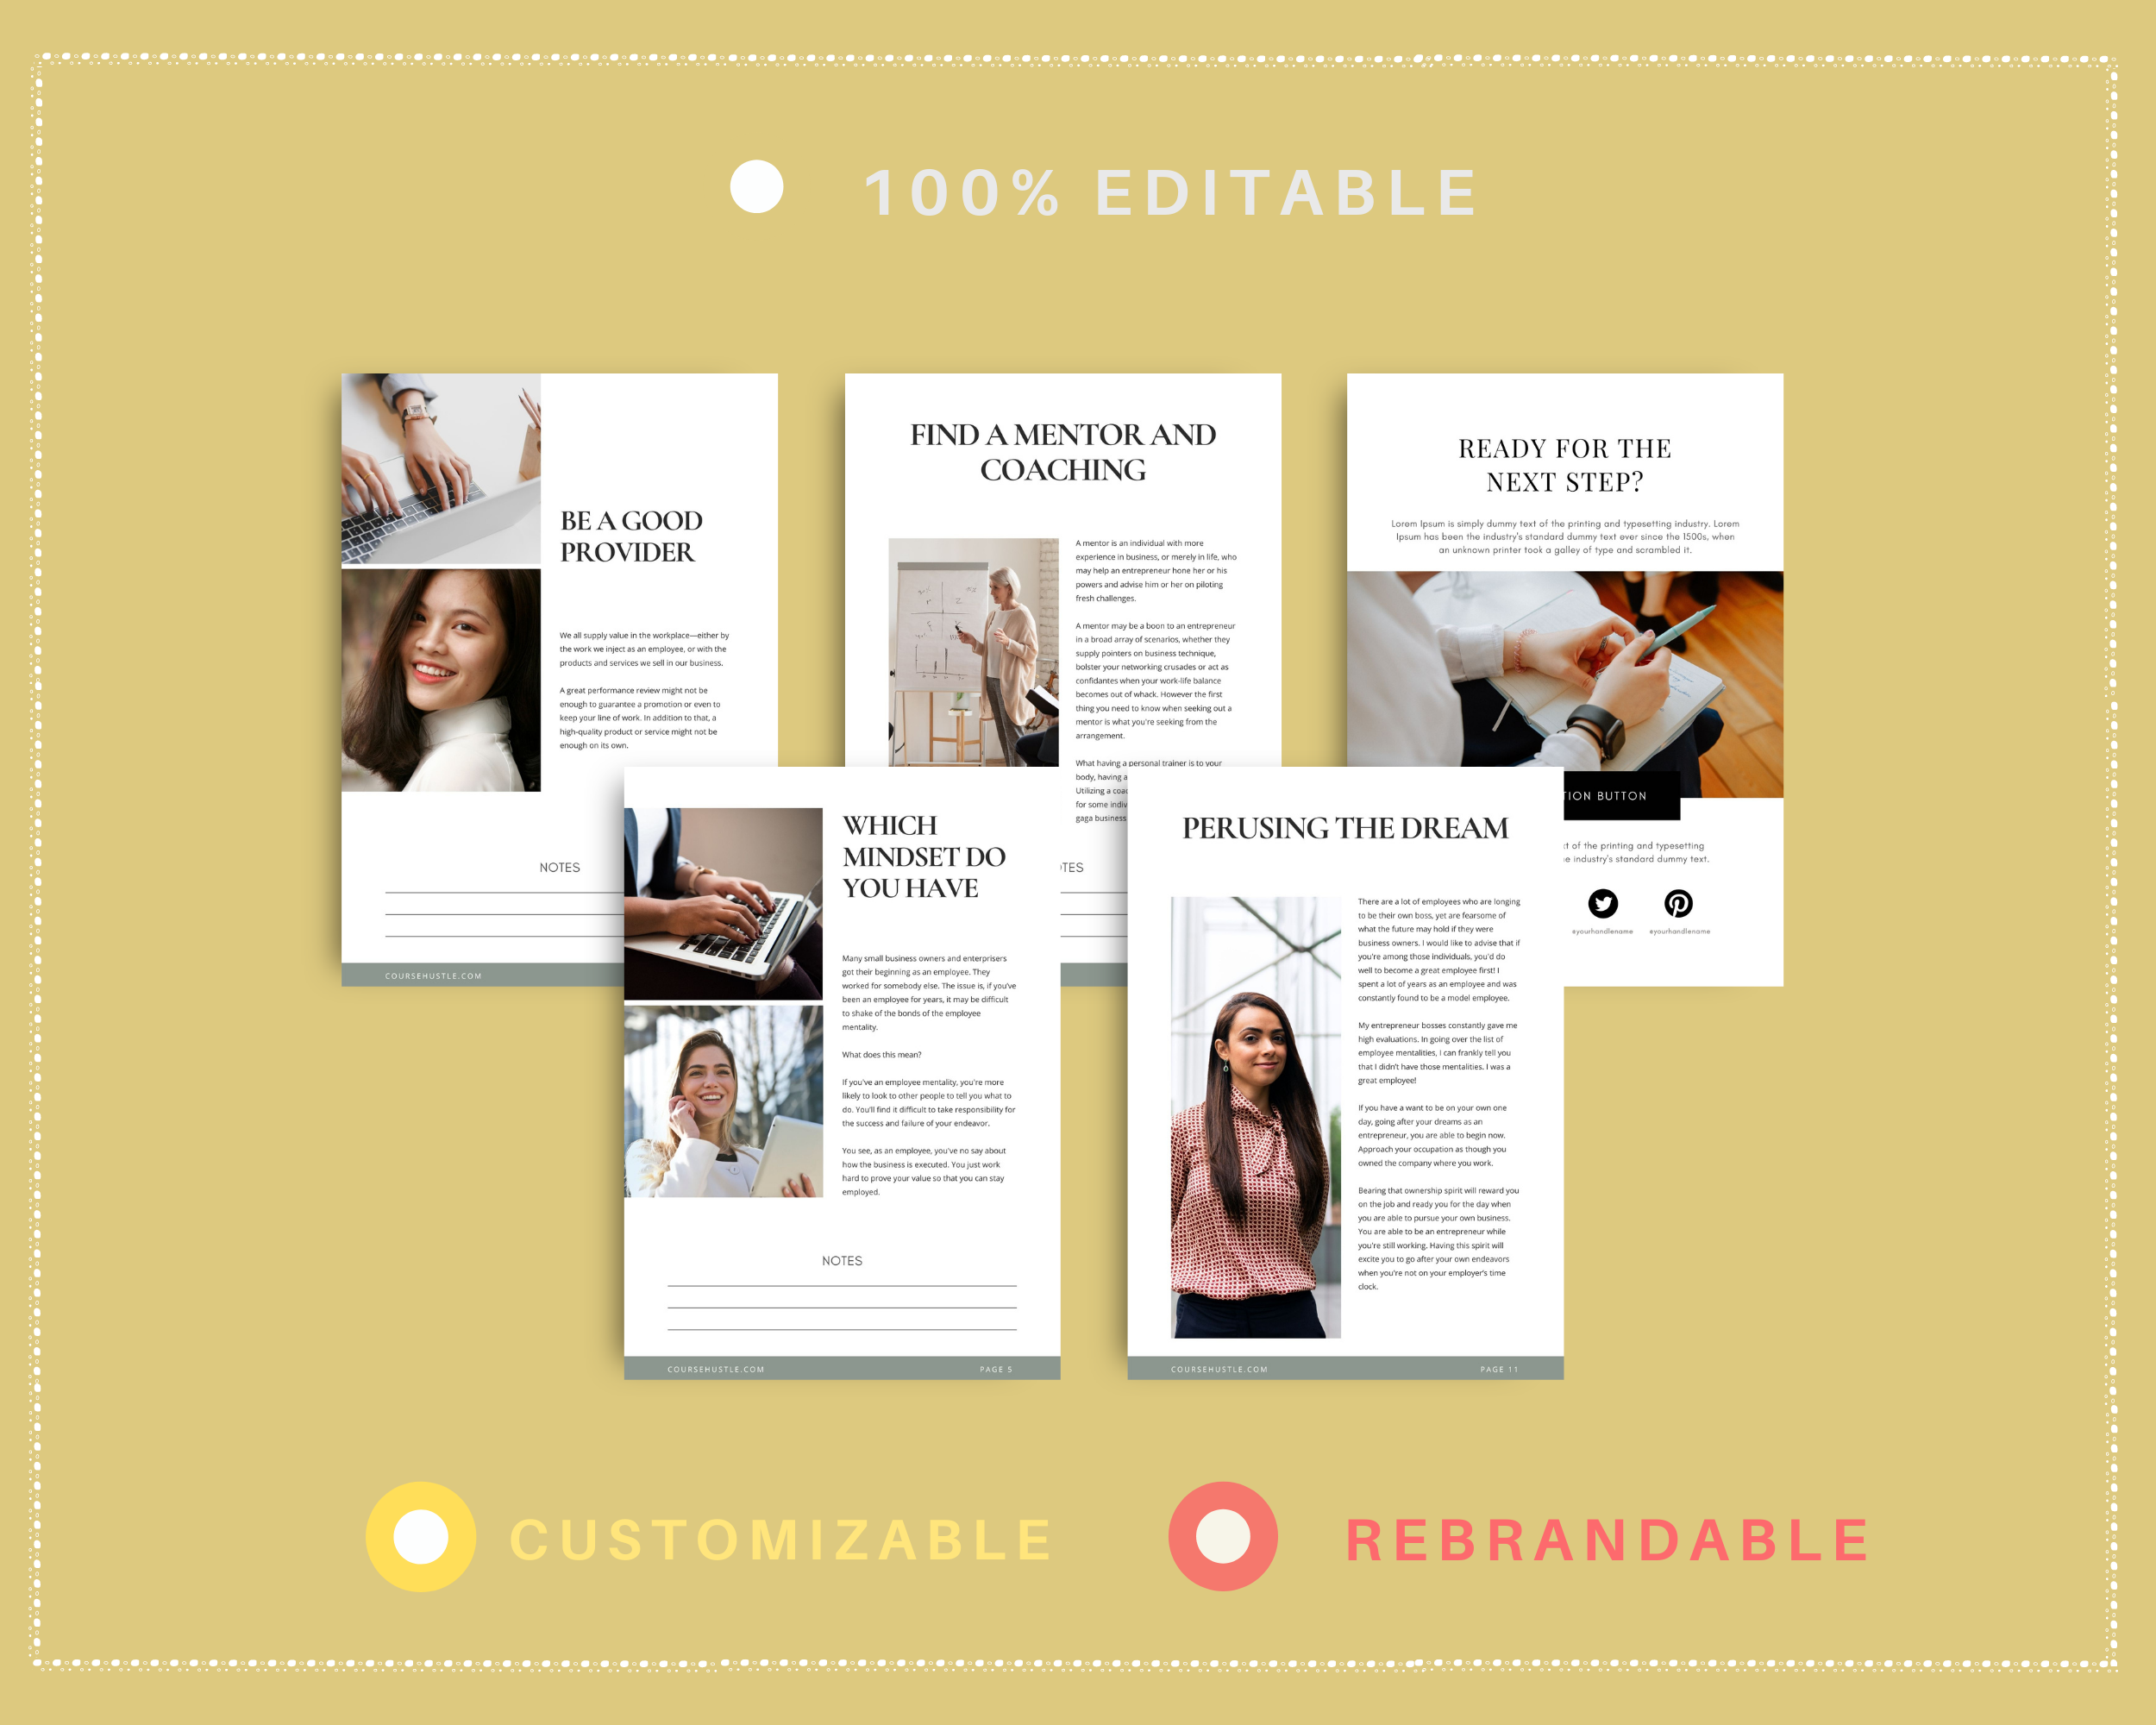 Done-for-You Think Like a Boss Playbook in Canva | Editable A4 Size Canva Template